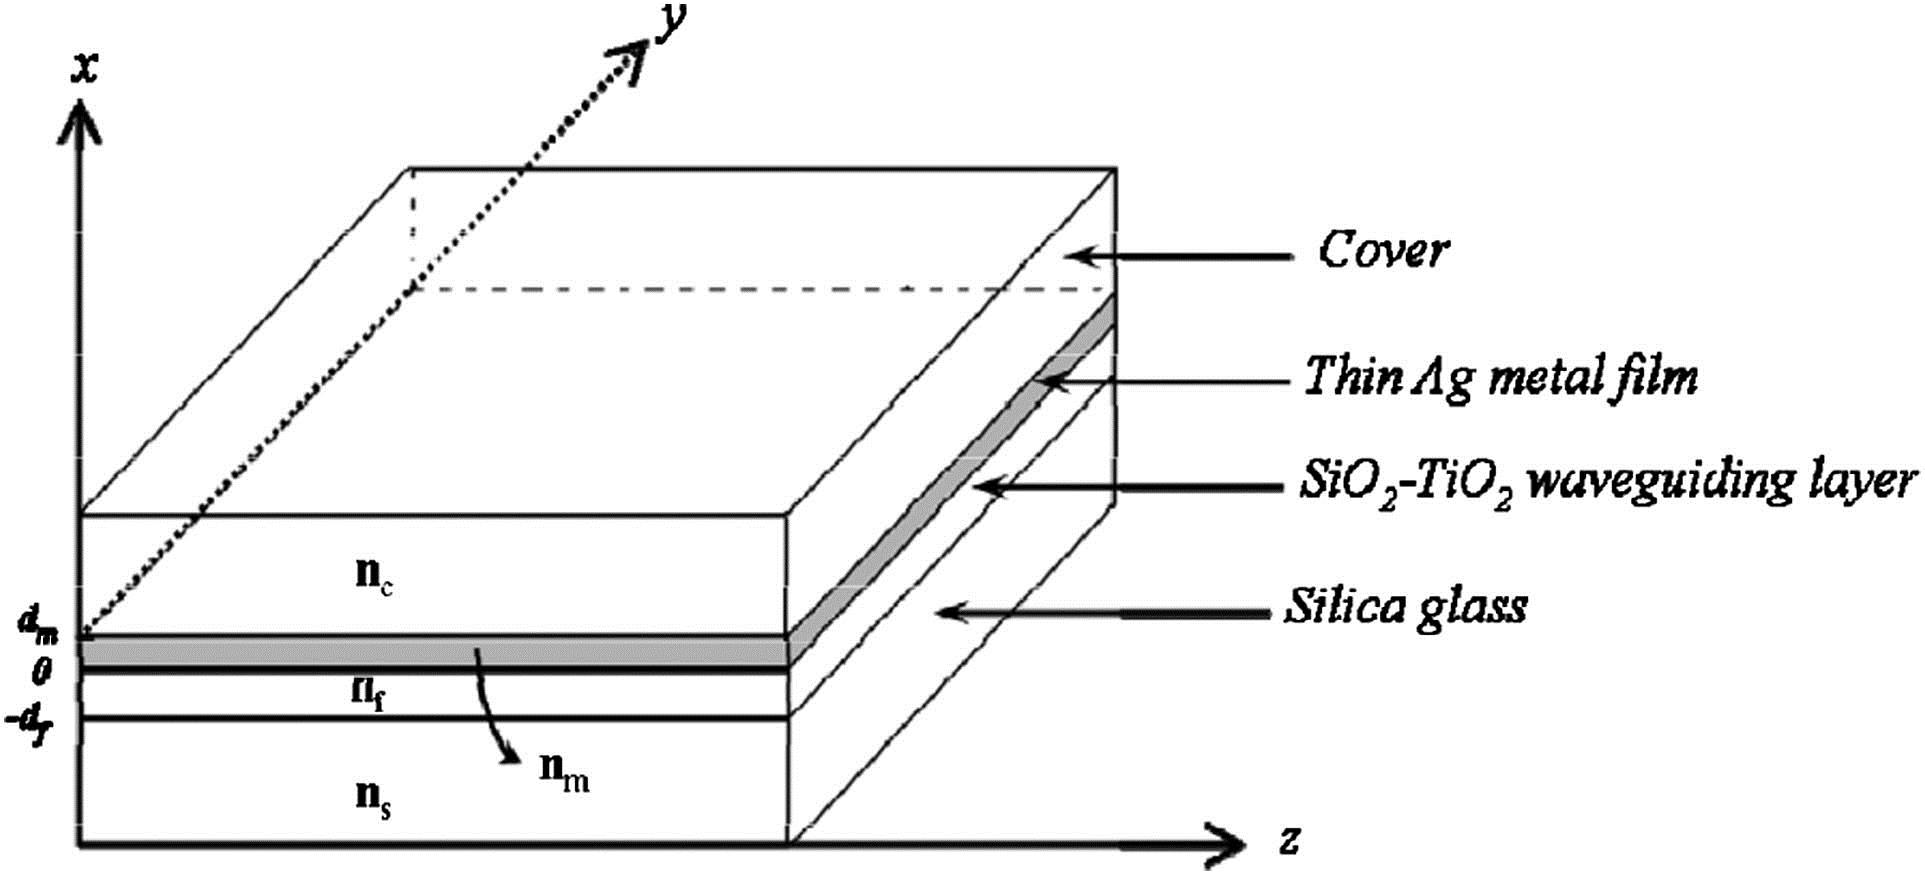 Four-layer planar waveguide structure with embedded thin metal layer of silver (Ag).